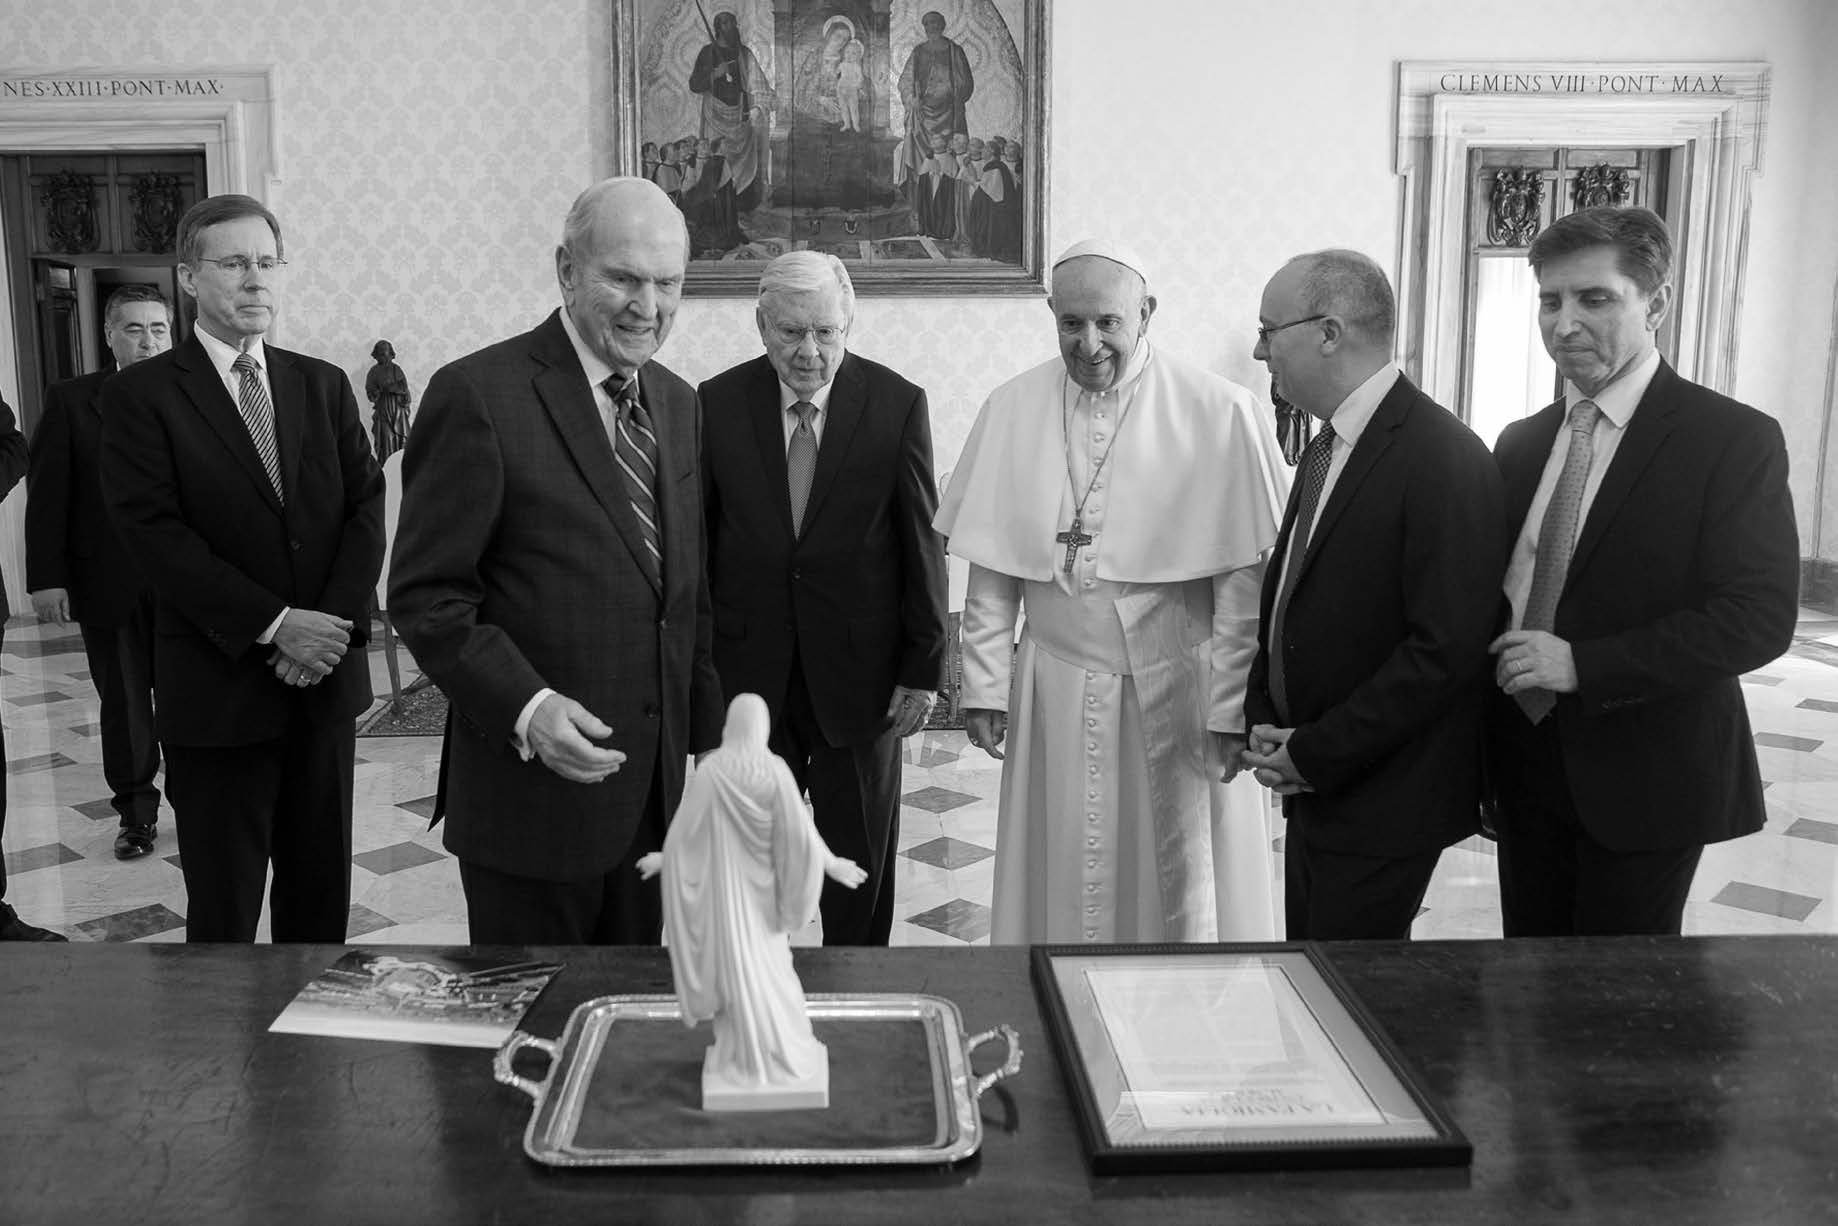 President Russell M. Nelson and Elder M. Russell Ballard visit with Pope Francis at the Vatican in Rome, Italy, 2019. Deseret News.